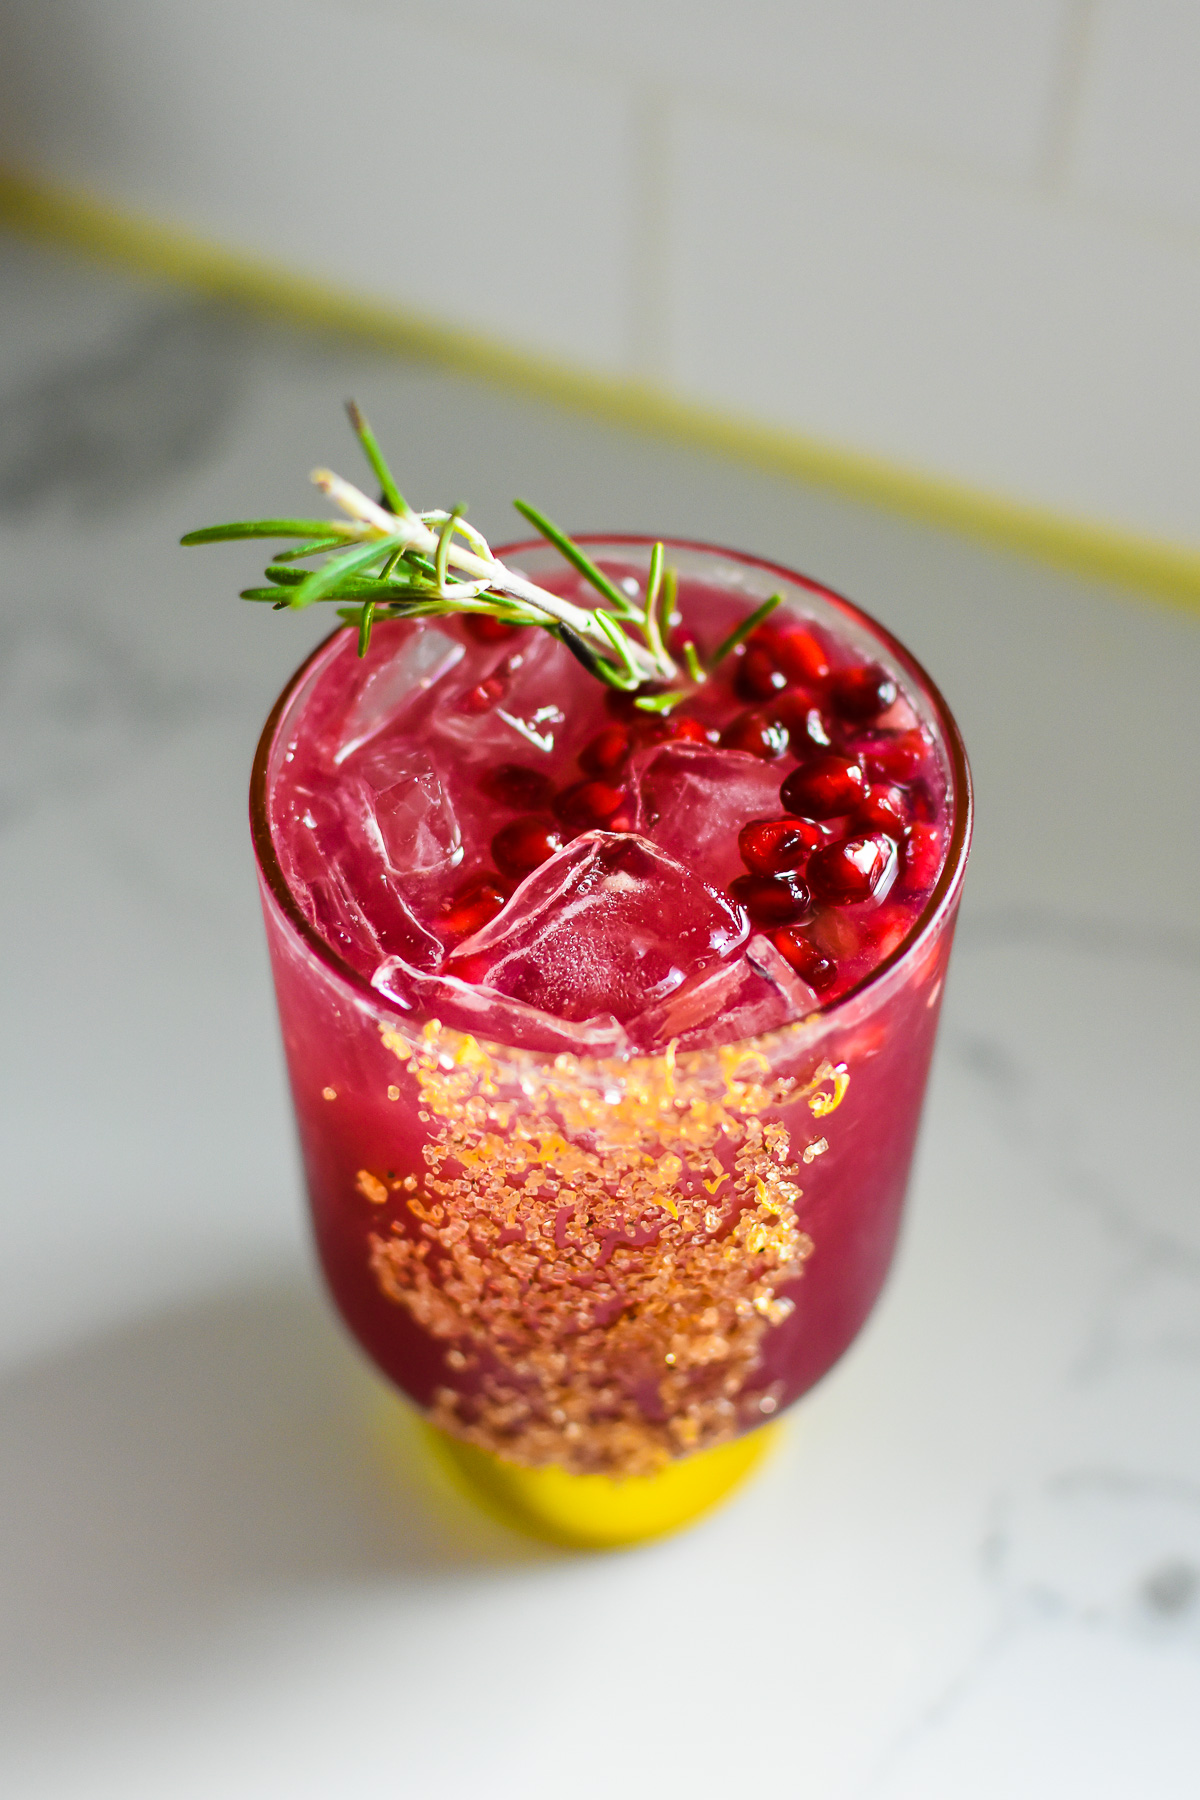 quality Christmas mocktail garnished with pomegranate seeds and fresh rosemary.